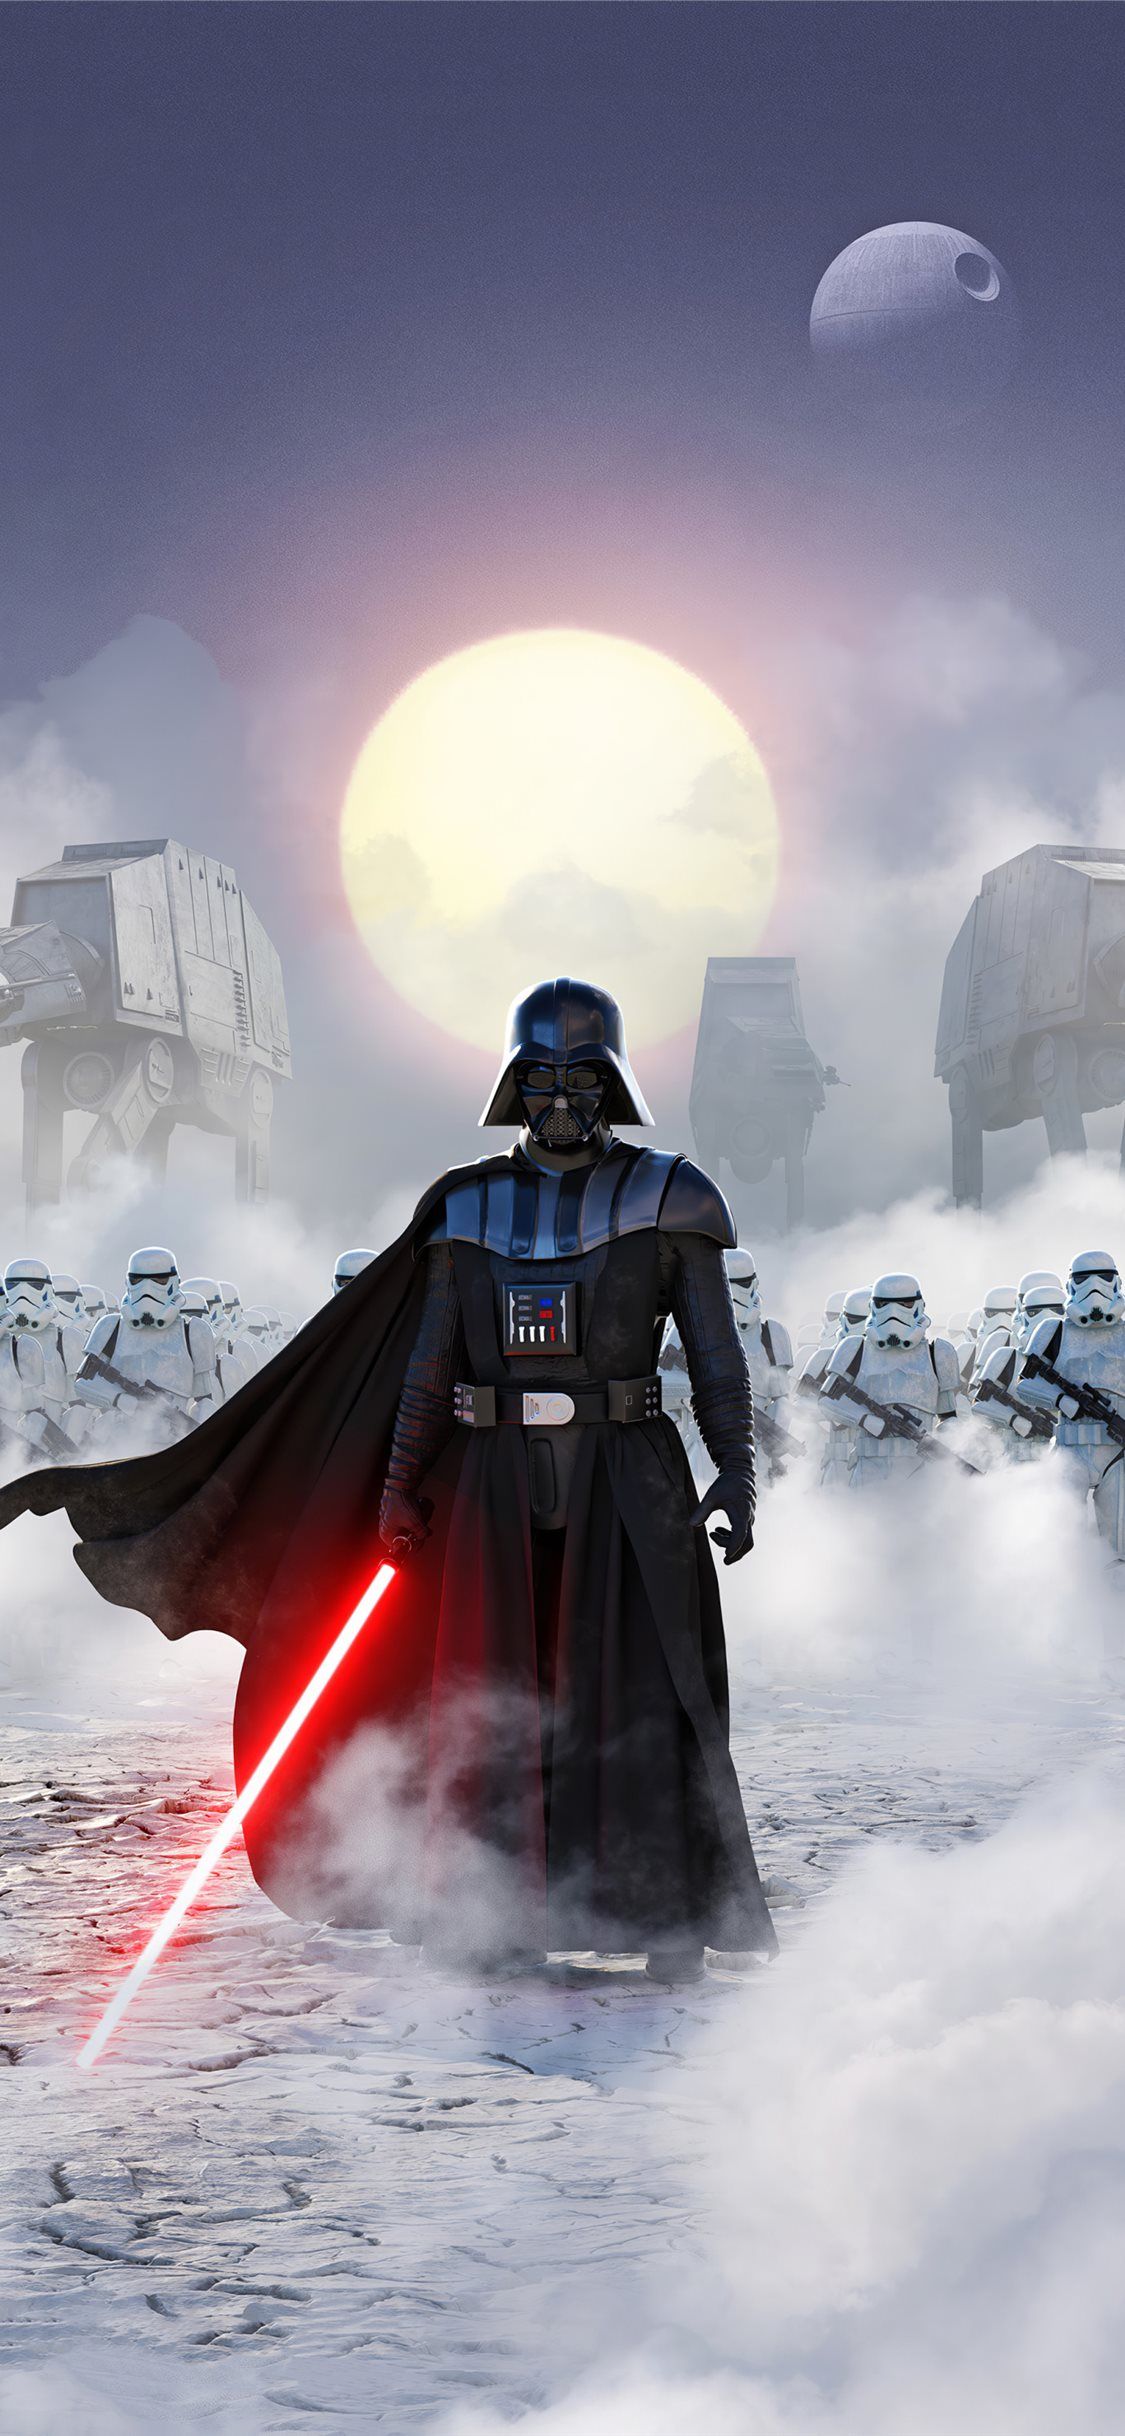 Cool Star Wars Wallpaper For iPhone